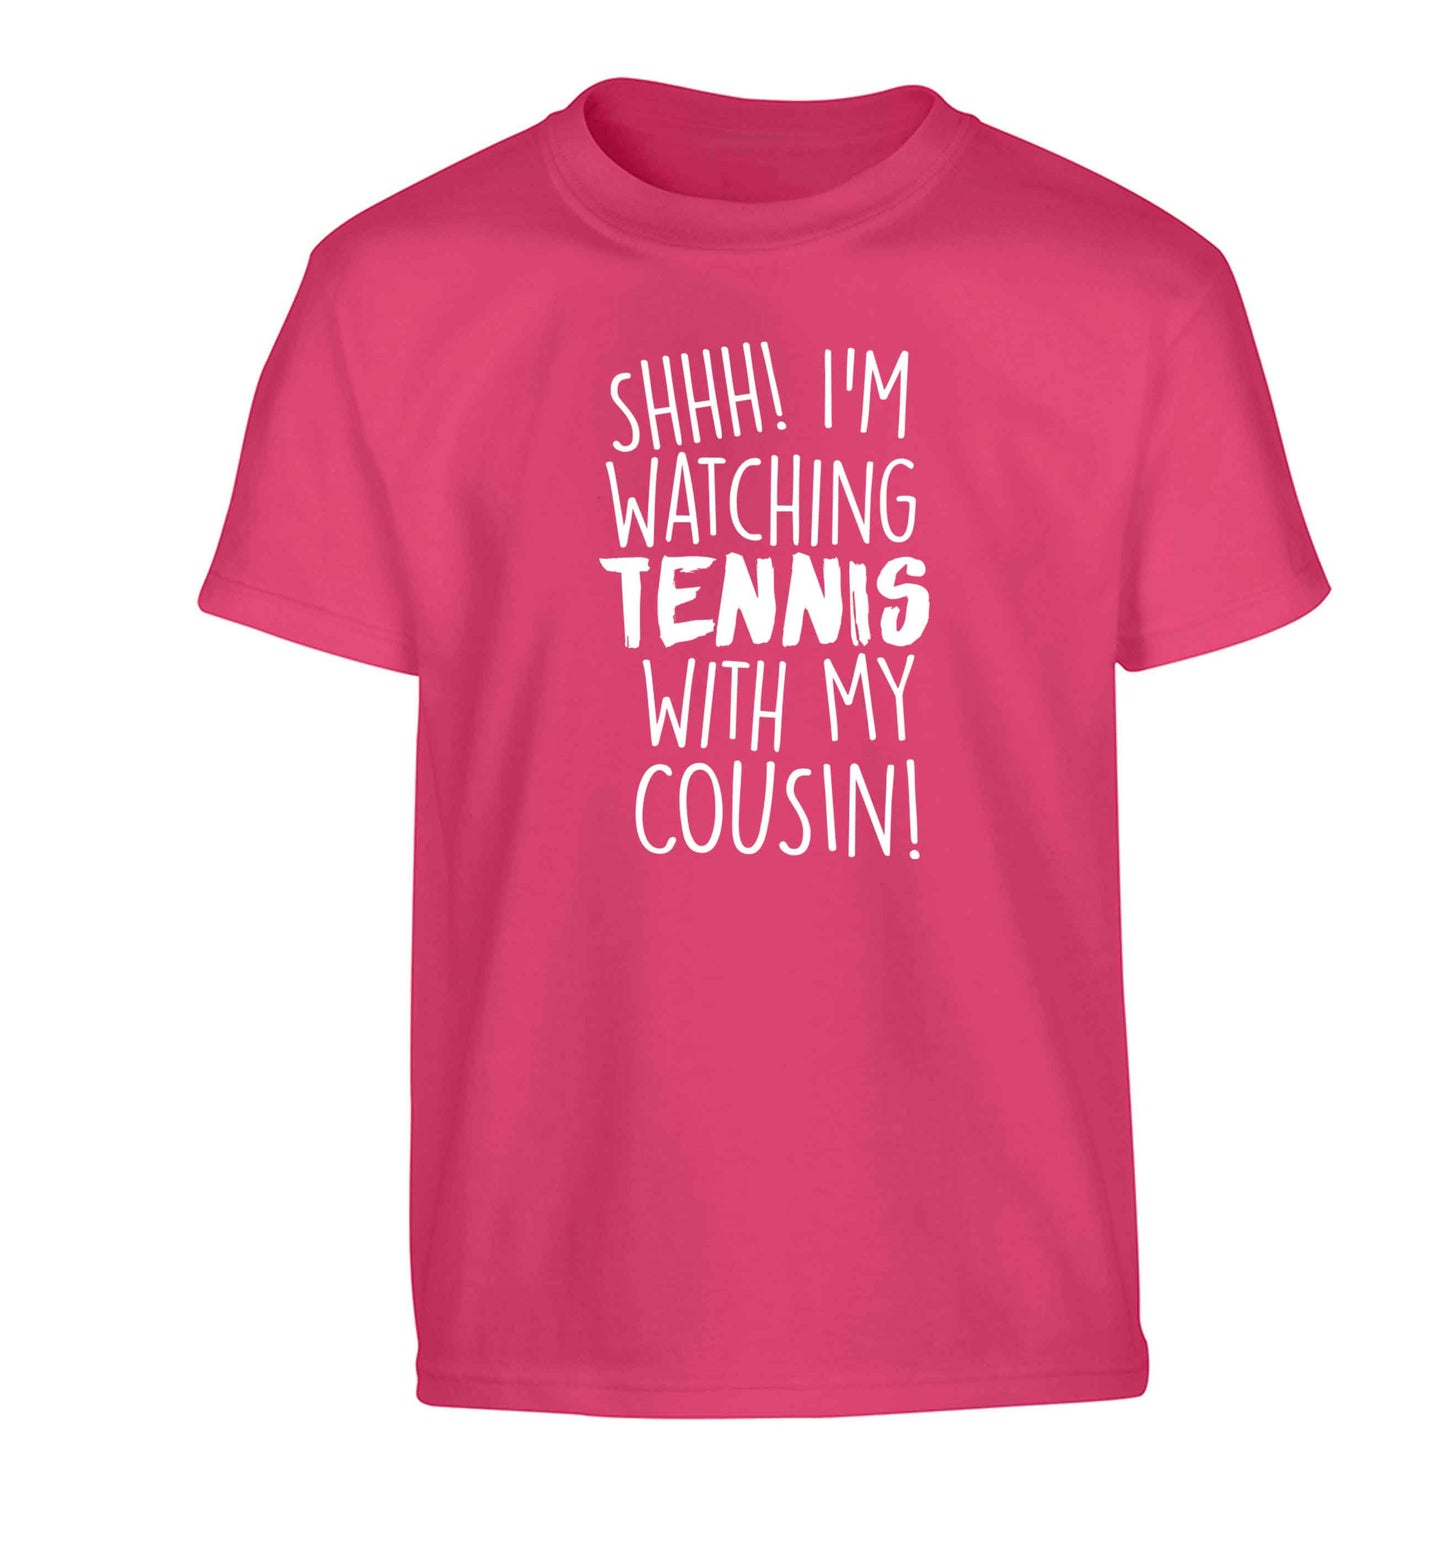 Shh! I'm watching tennis with my cousin! Children's pink Tshirt 12-13 Years